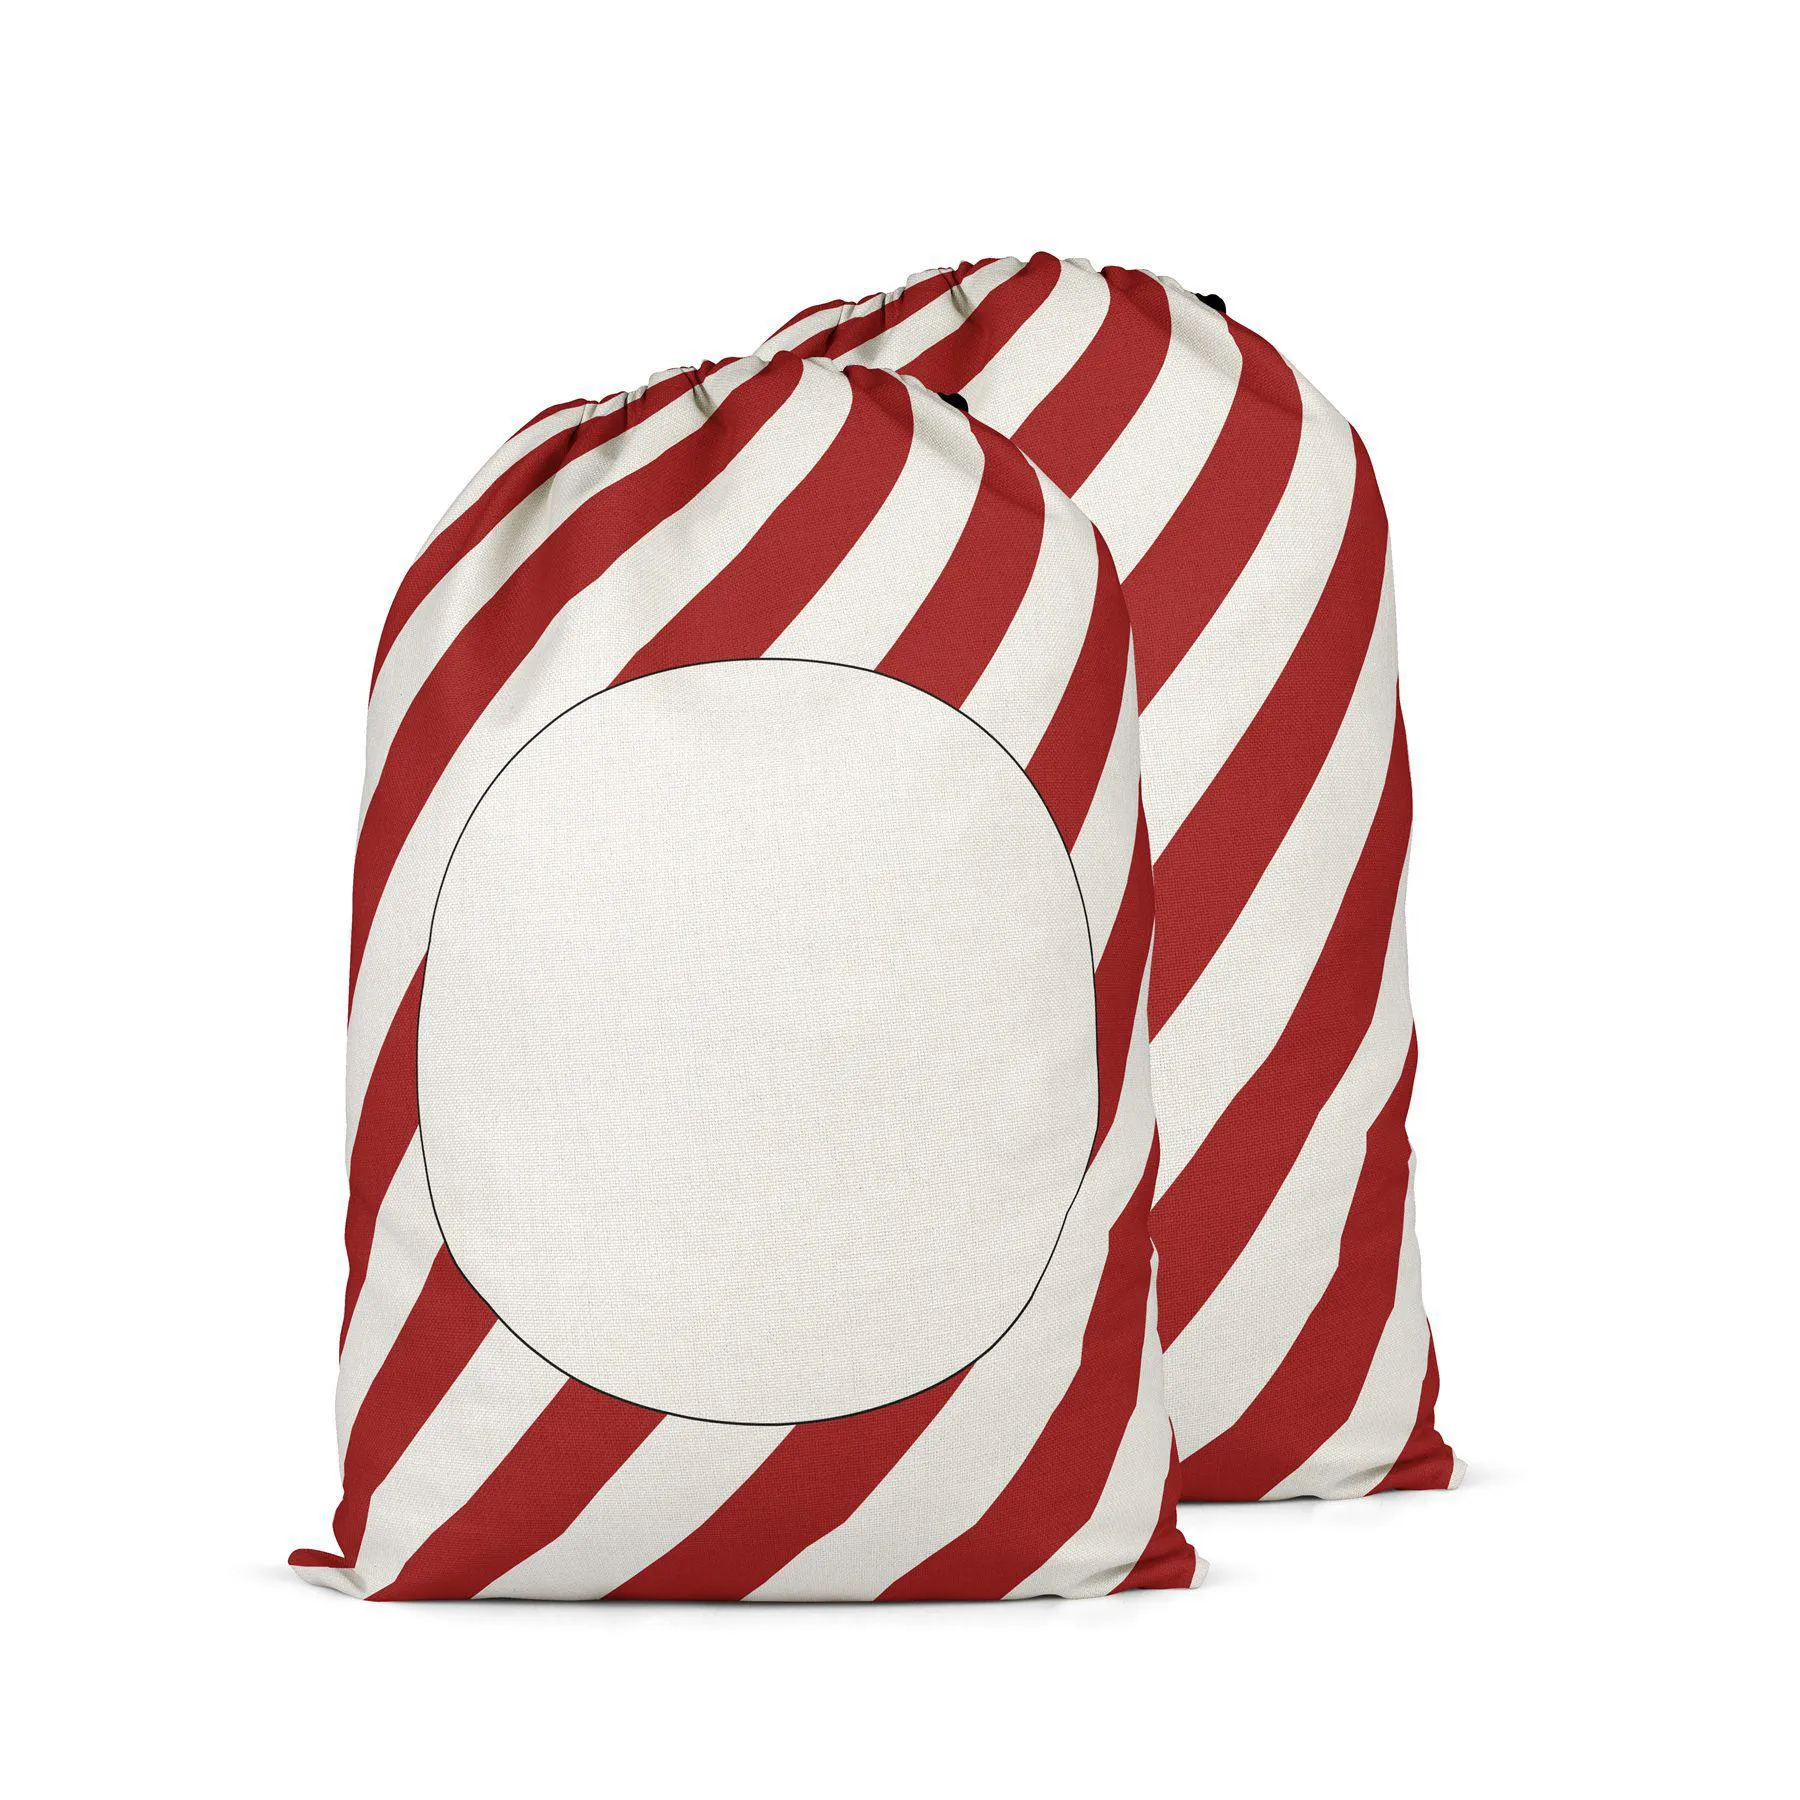 48*64cm Christmas Gift Bags Sublimation Blanks Santa Sack Plaid Pattern Candy Storage Bag with Drawstring w-00984